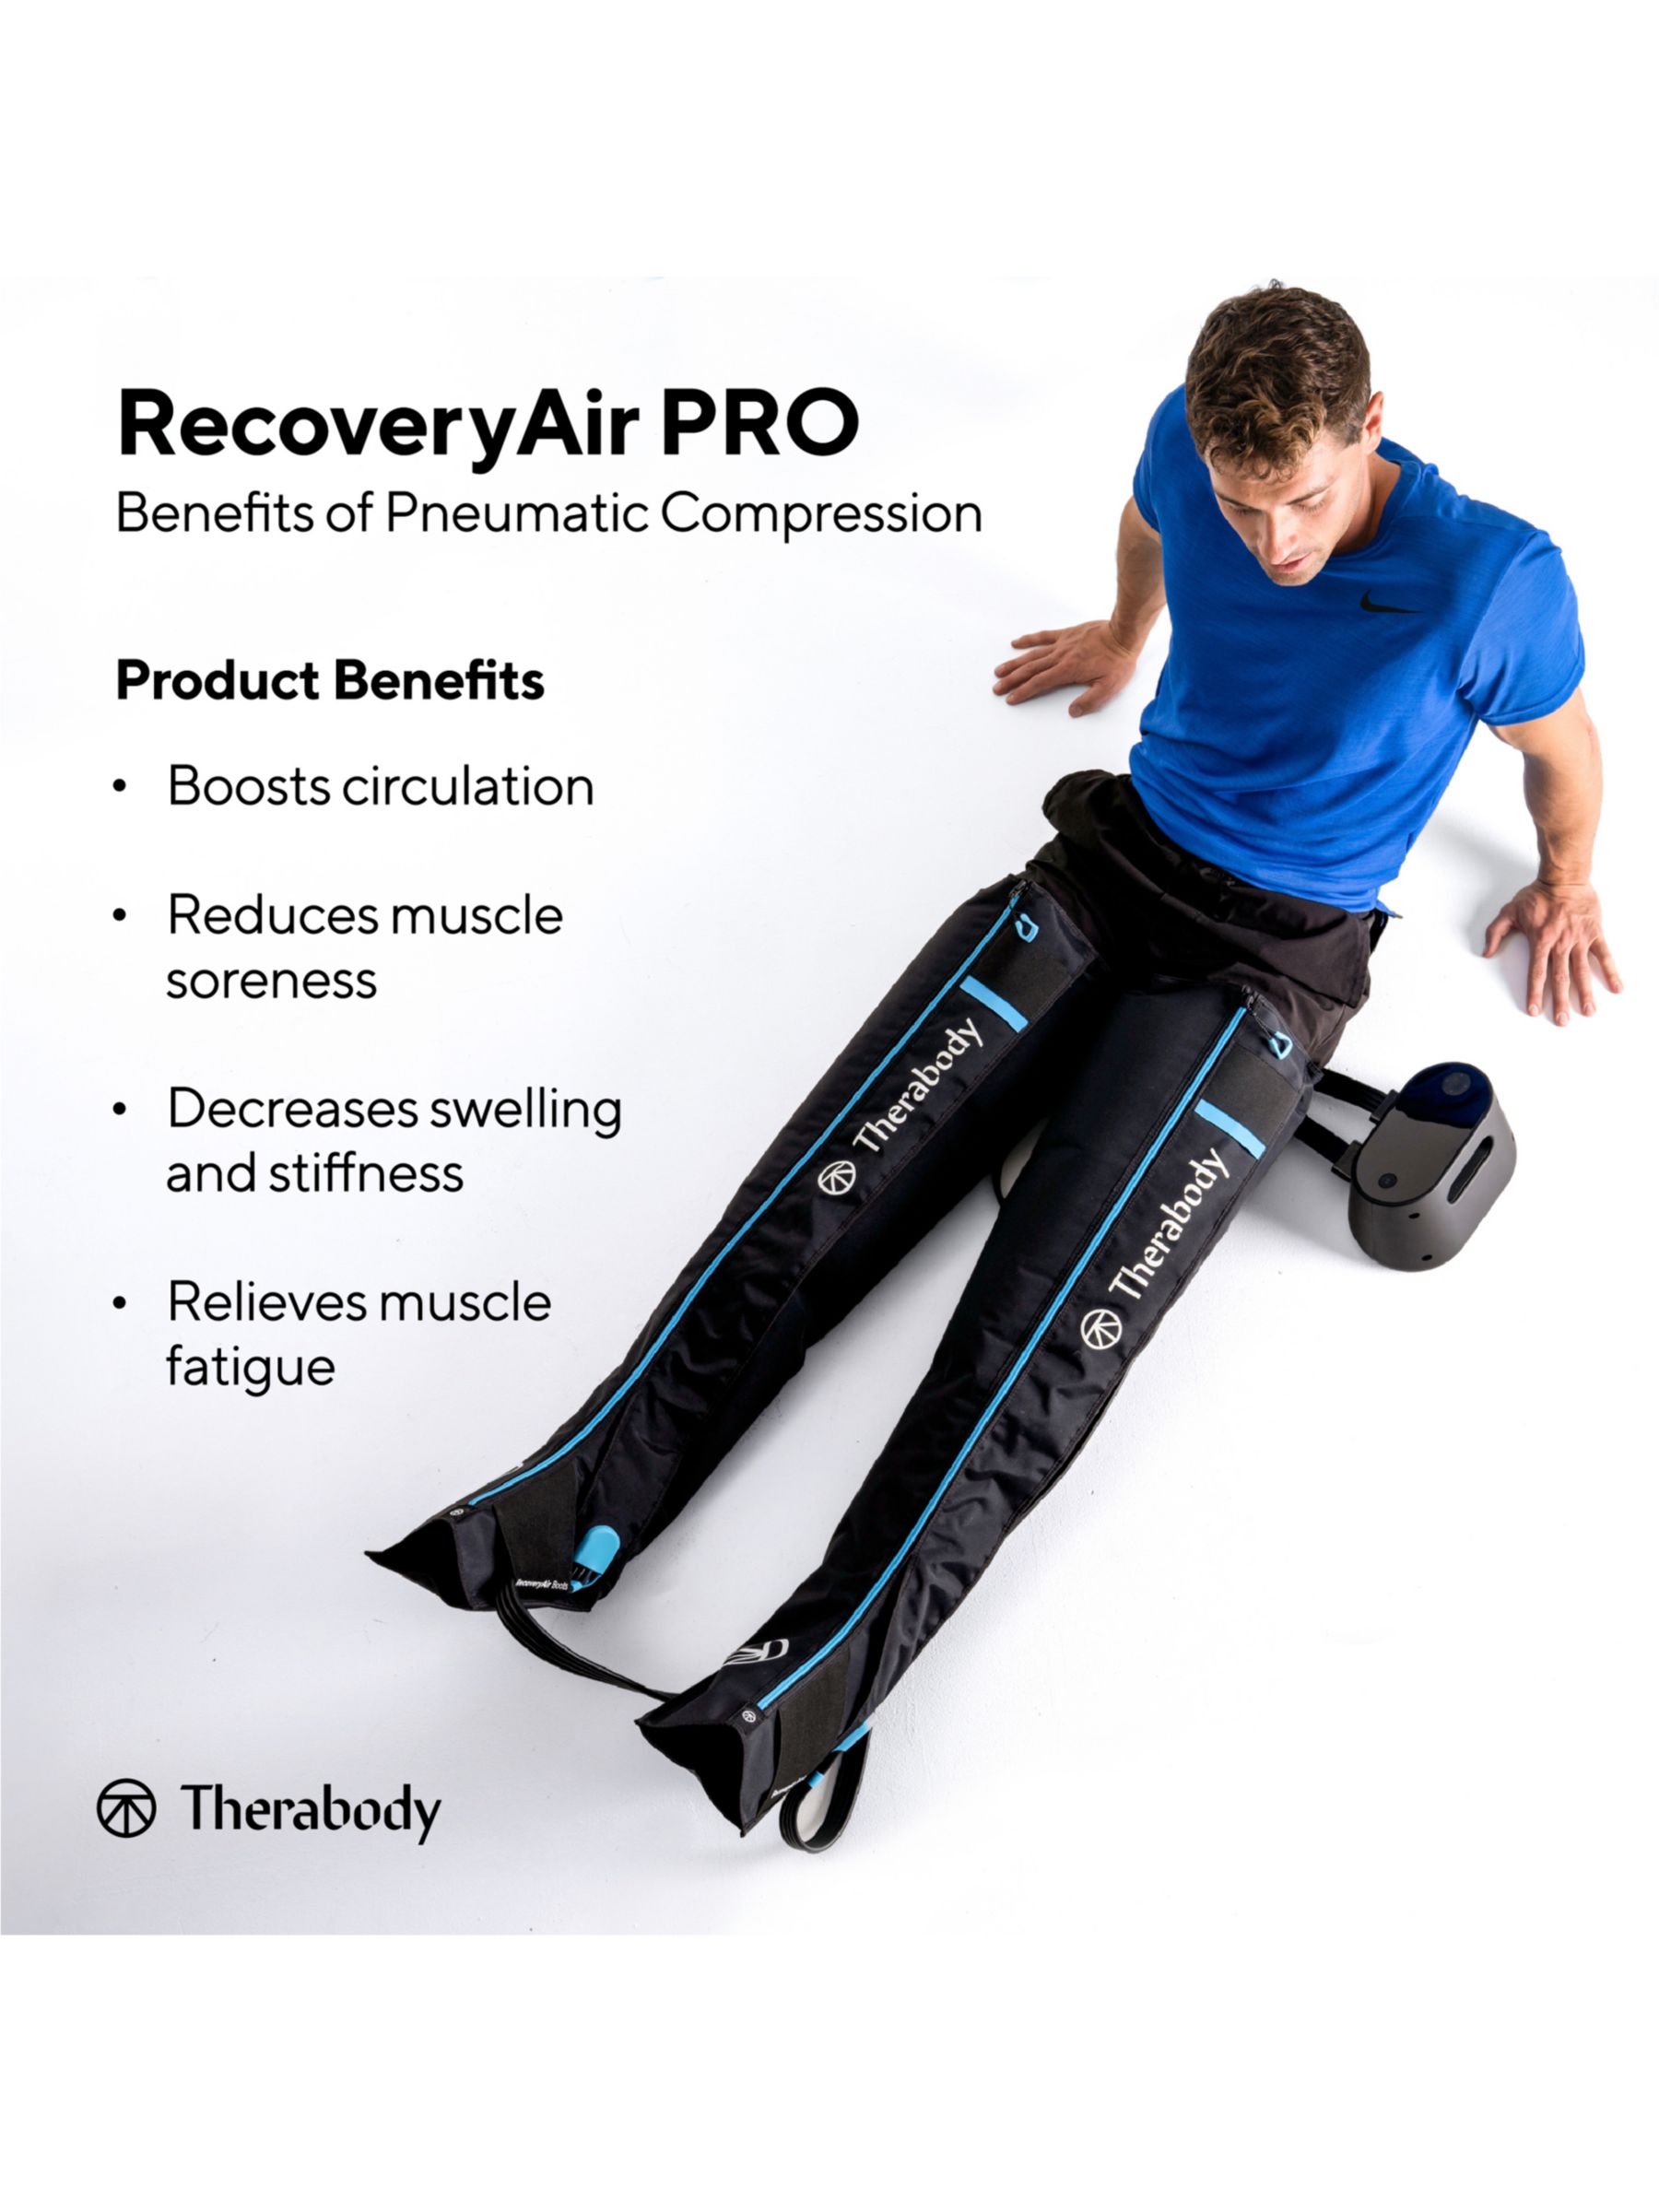 Therabody recoveryair review: Do the post-workout compression boots  actually improve fitness?